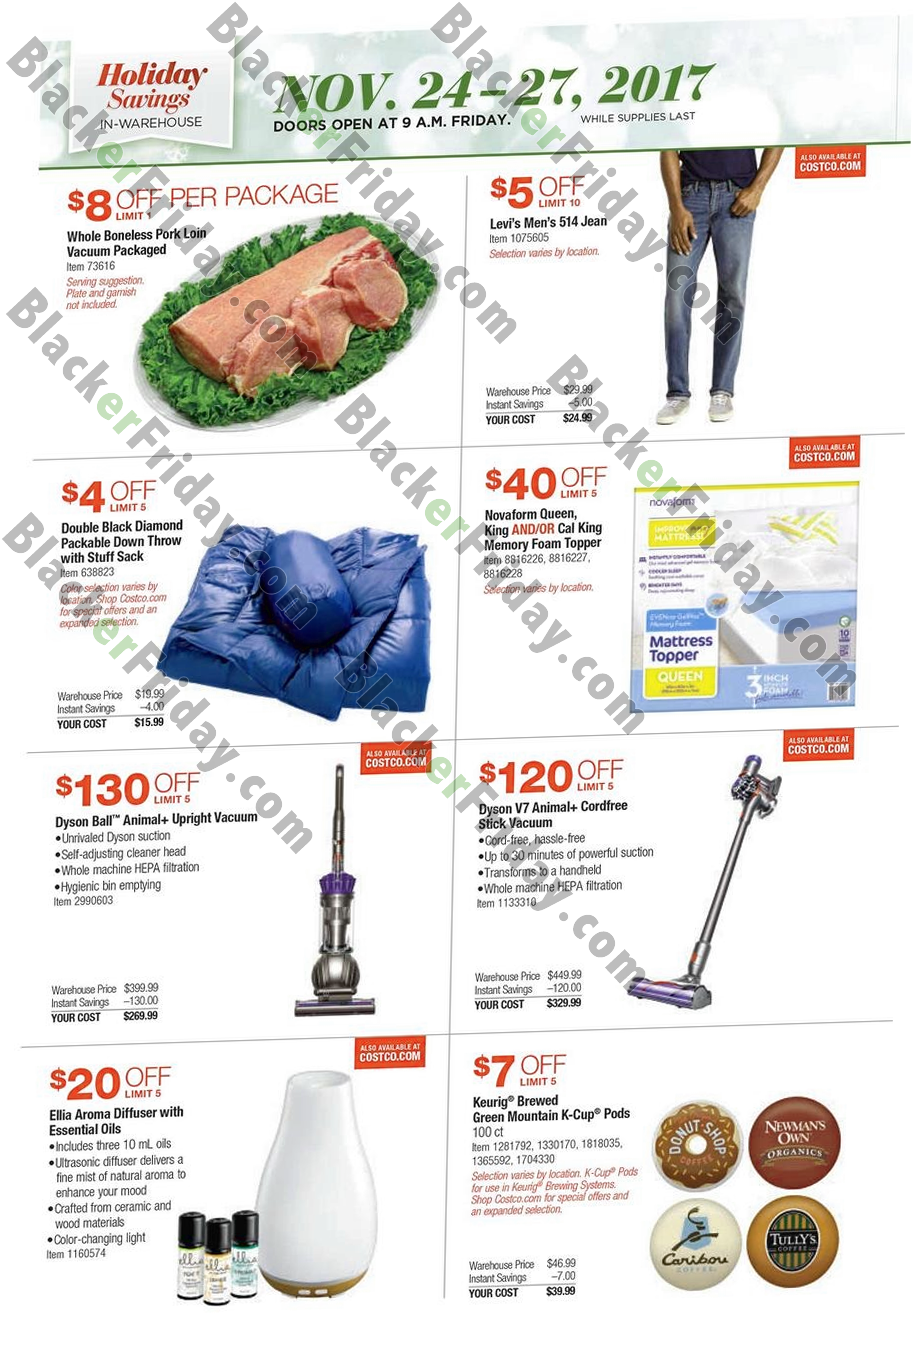 Costco&#39;s Black Friday 2019 Ad is Leaked! - Blacker Friday